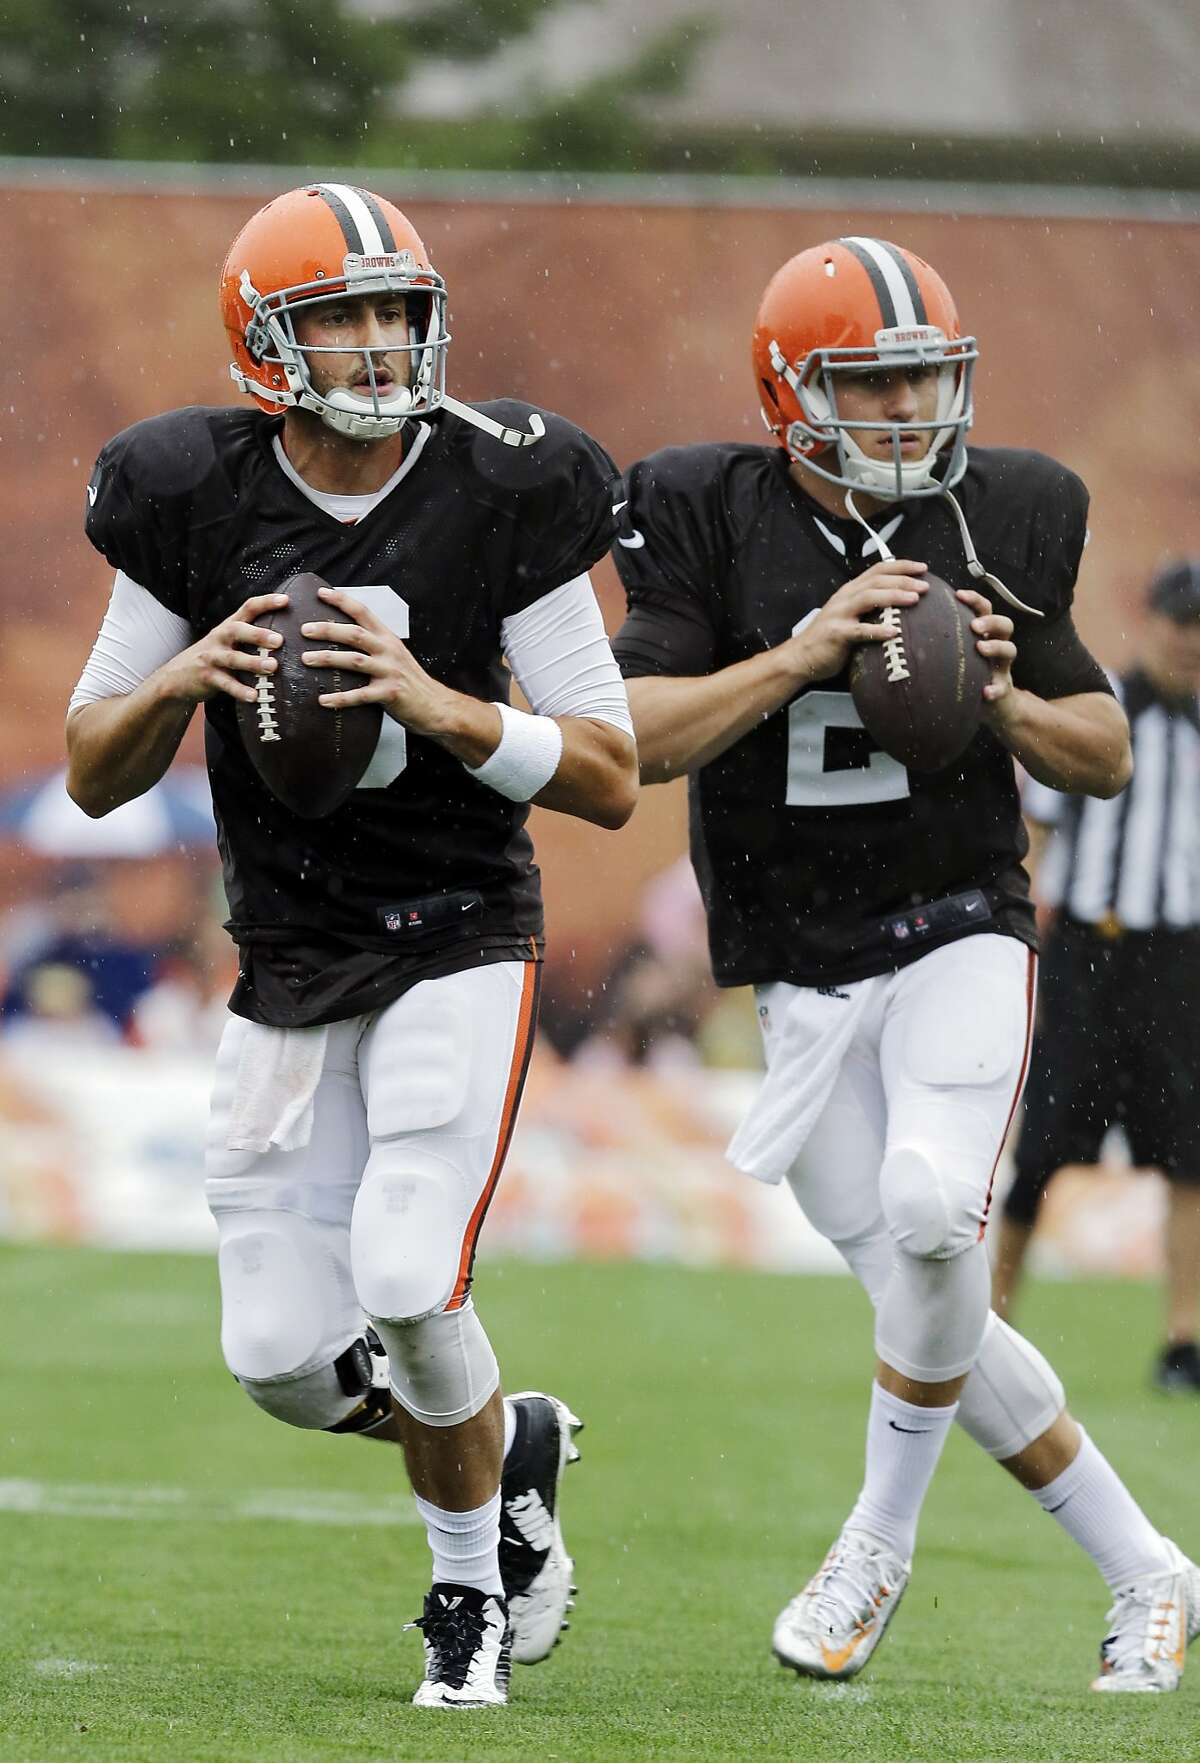 Cleveland Browns quarterbacks Brian Hoyer, left, and Johnny Manziel drop back to pass during practice at NFL football training camp in Berea, Ohio on Monday, Aug. 11, 2014. (AP Photo/Mark Duncan)